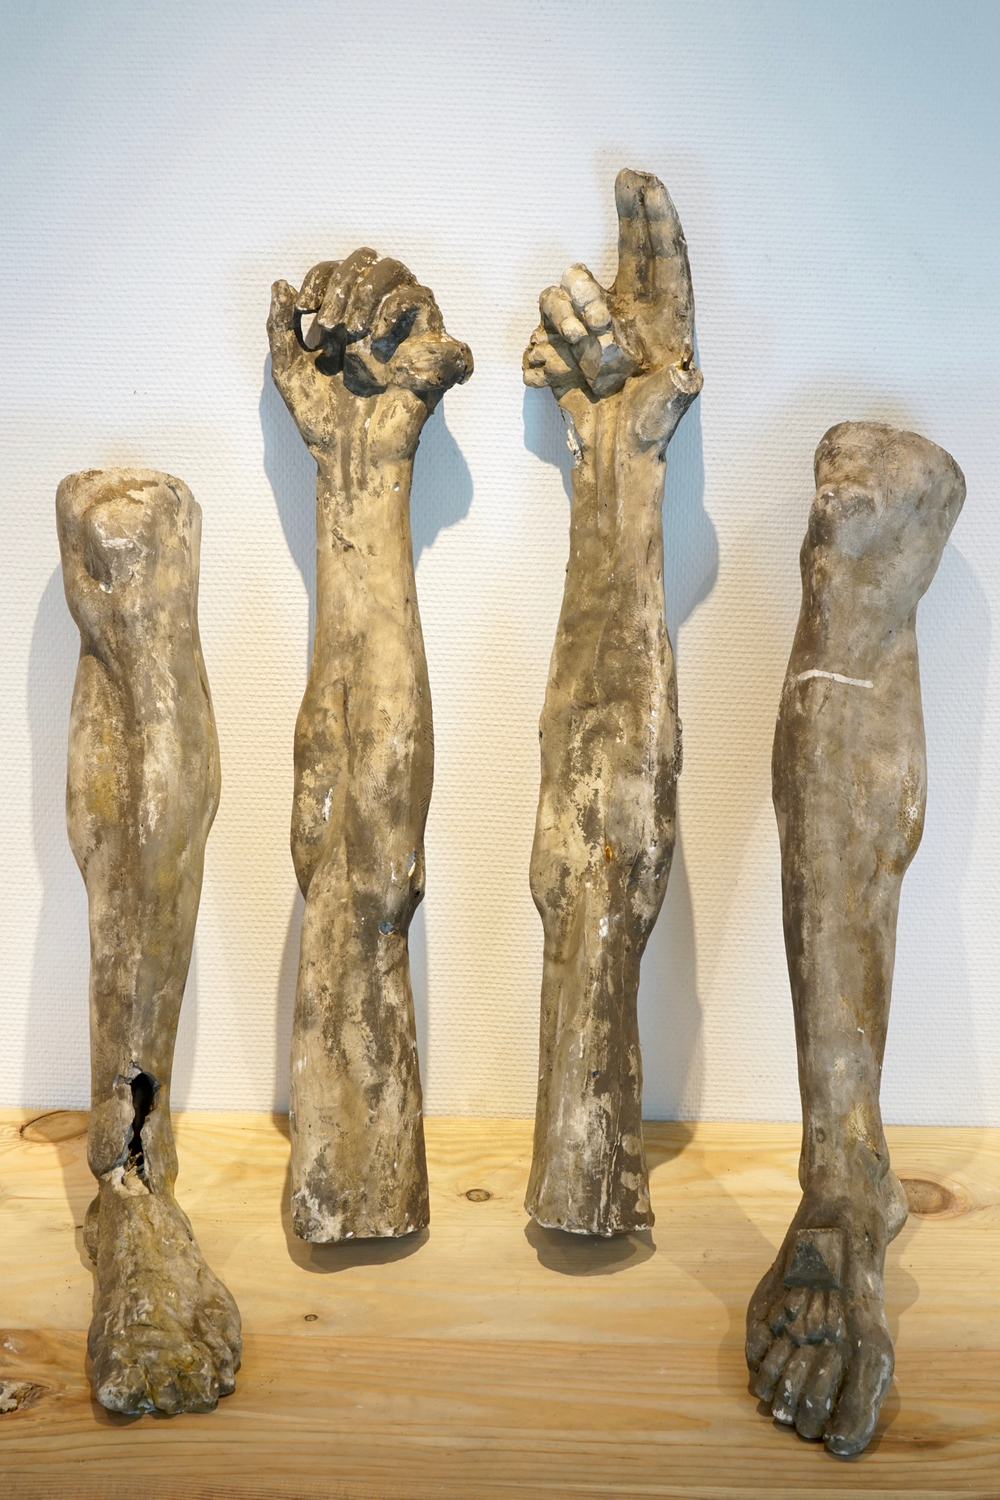 A set of four plaster casts: two arms and two legs, 19/20th C., Bruges